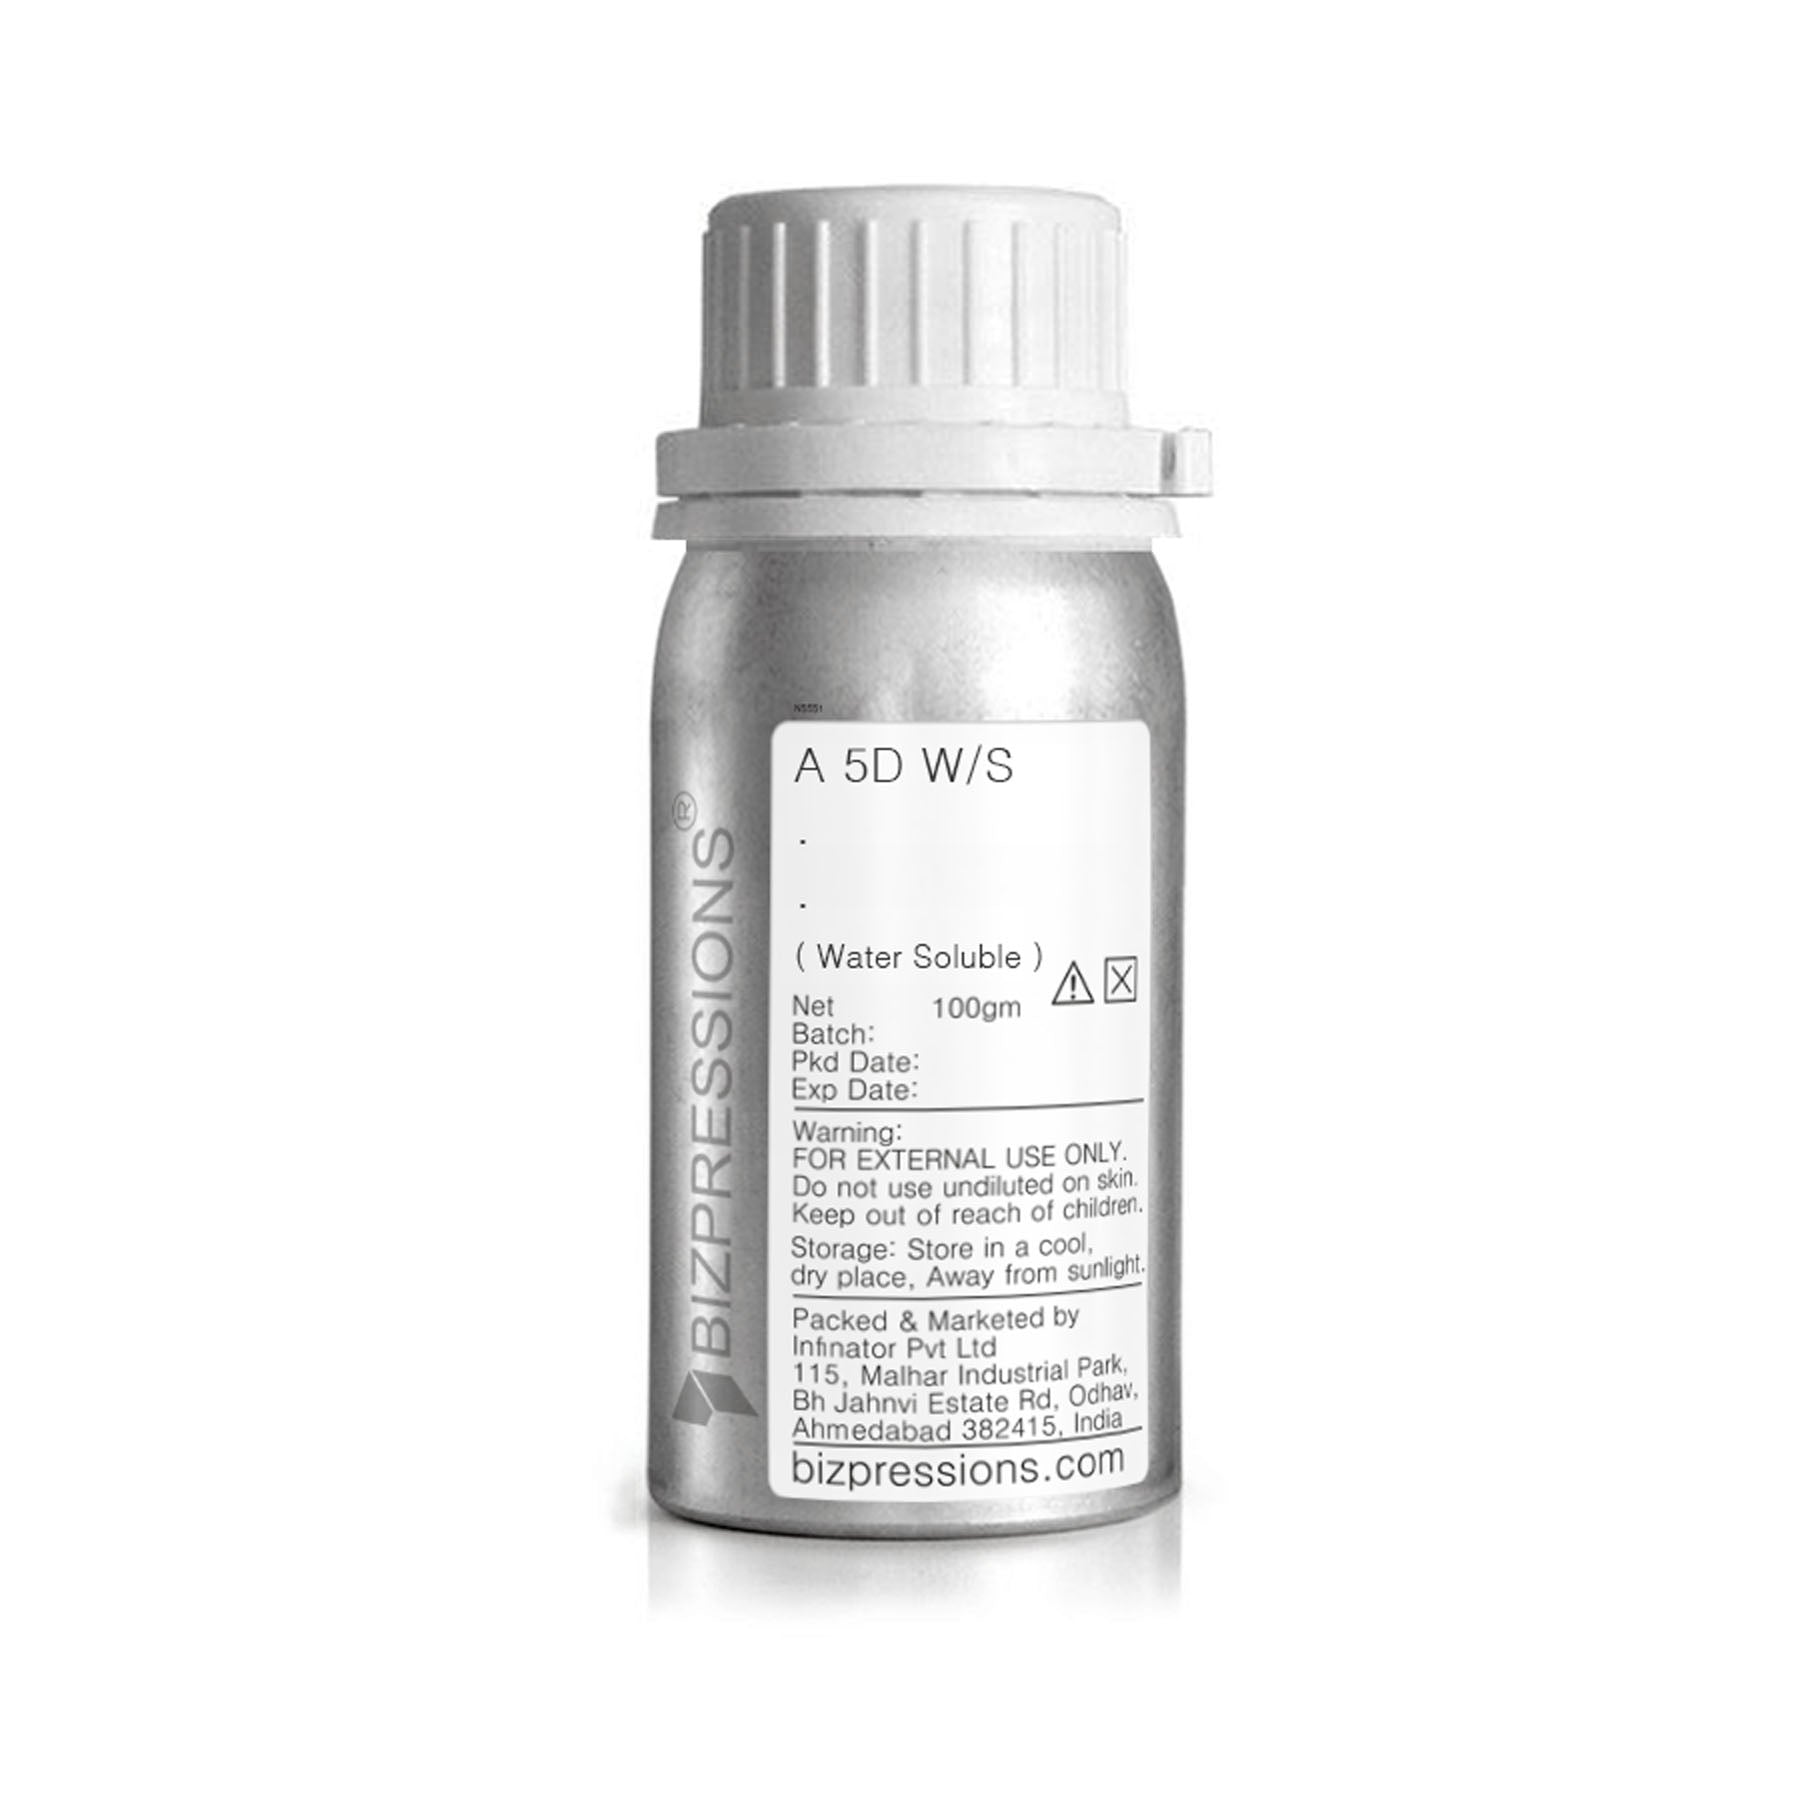 A5D W/S - Fragrance ( Water Soluble ) - 100 gm